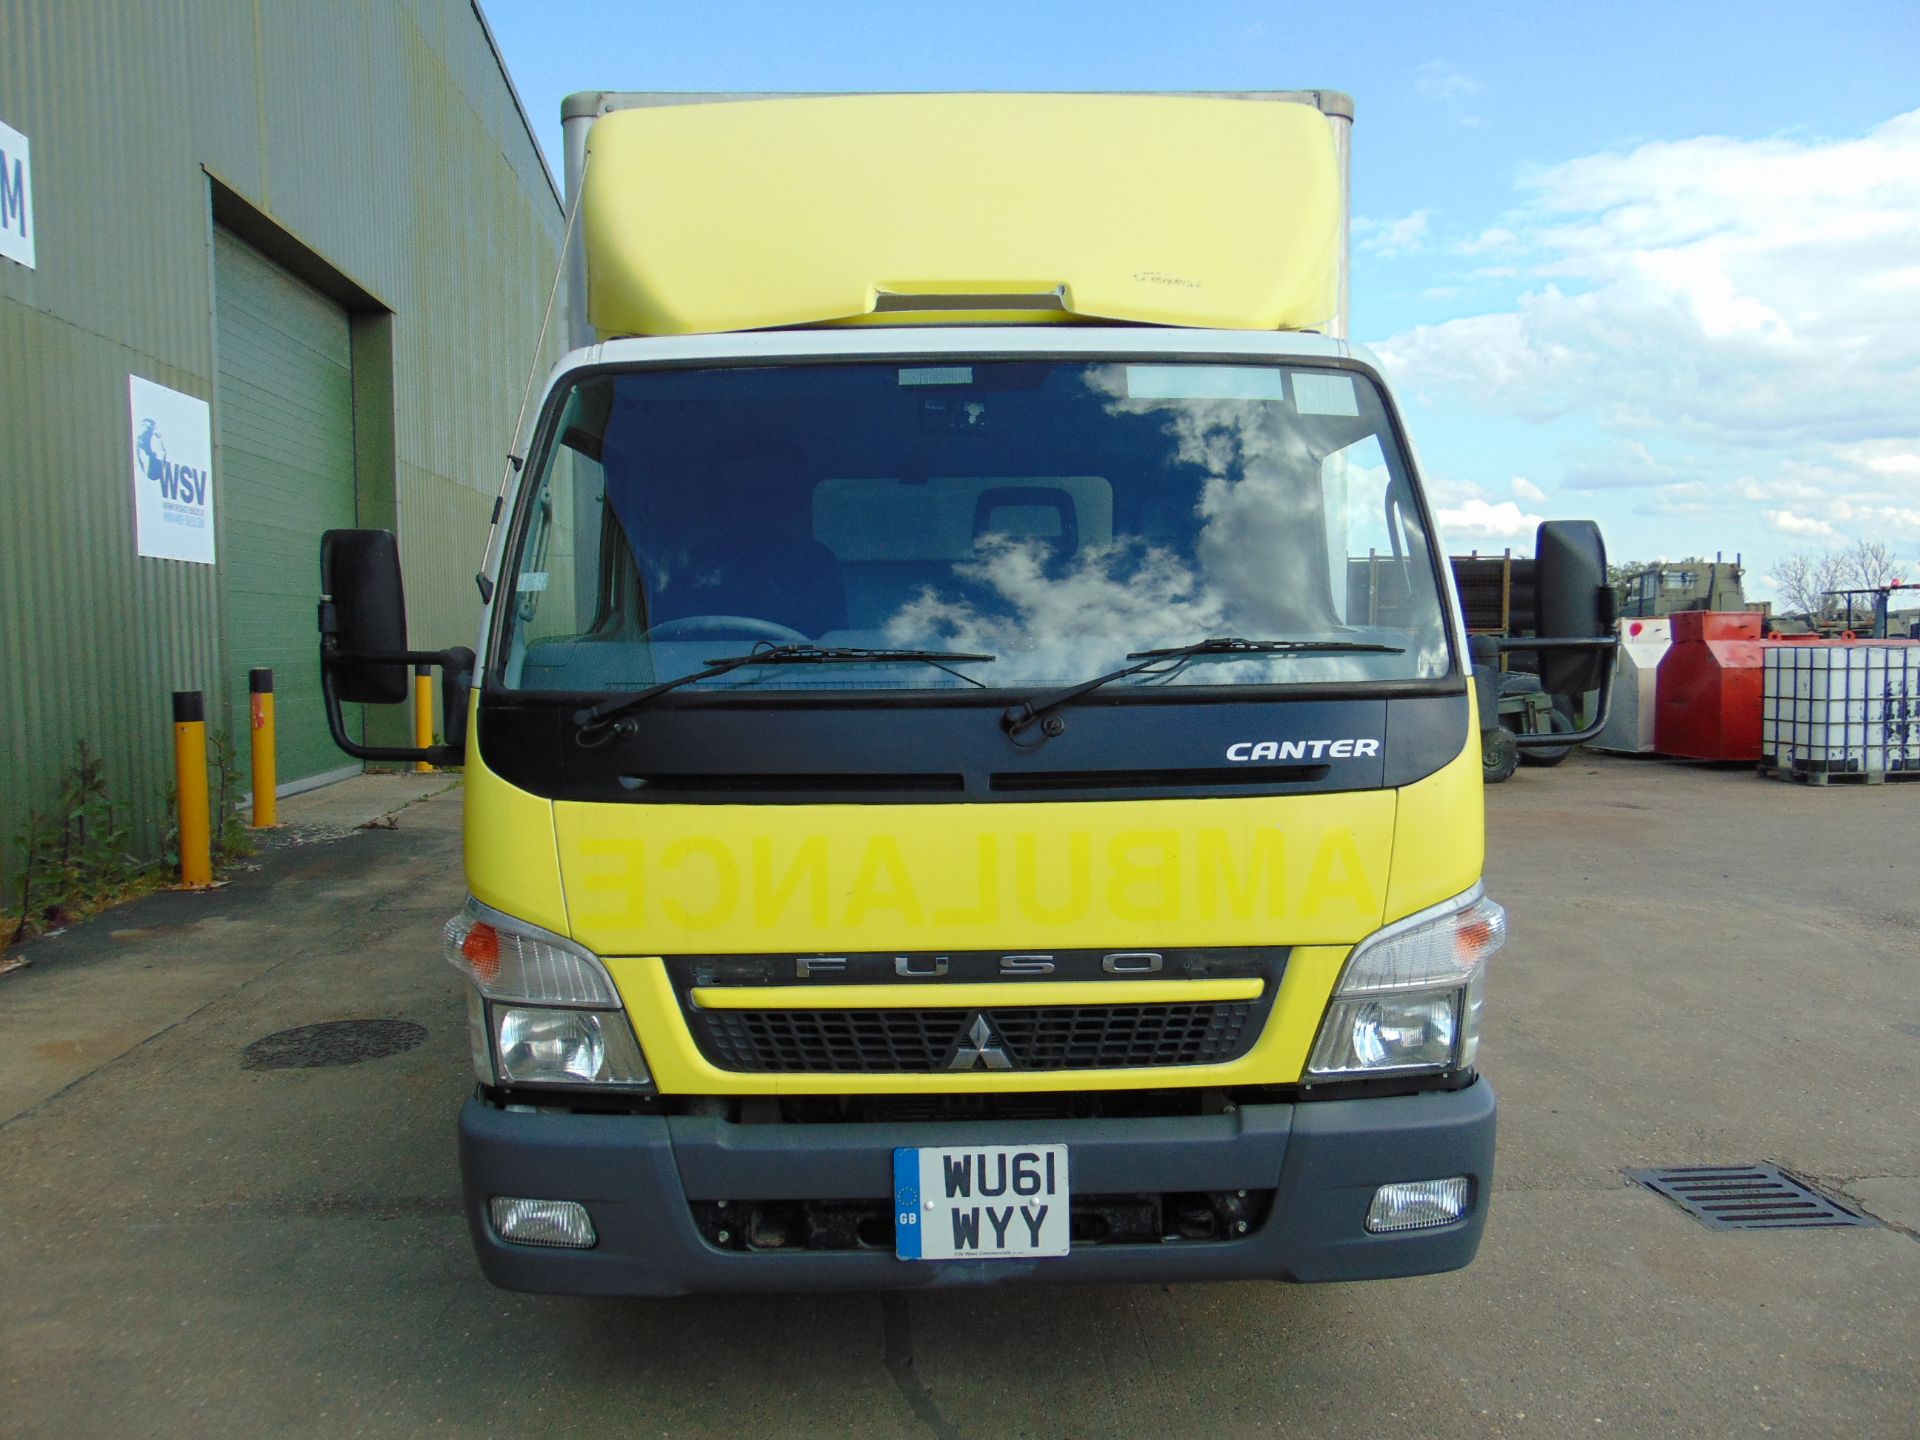 2011 Mitsubishi Fuso Canter Box lorry 7.5T - Only 5400 Miles! - Image 2 of 51